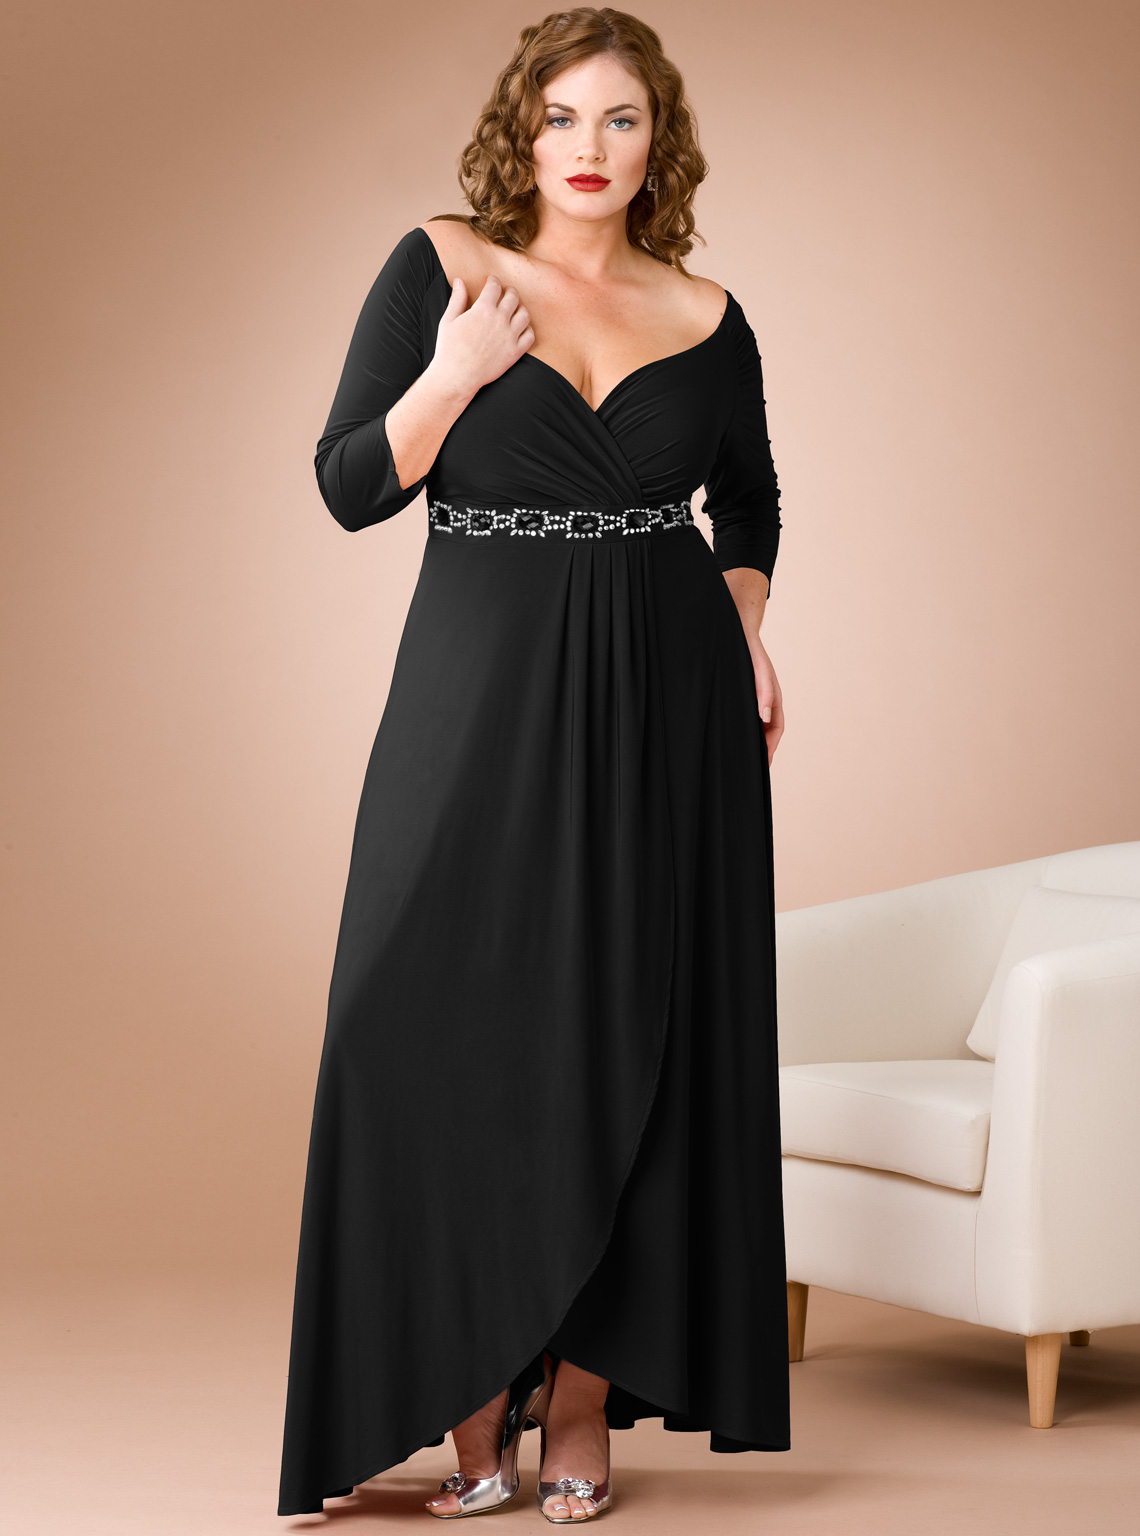 Be Style Icon With Plus Size Designer Clothing: Get Better Dressing